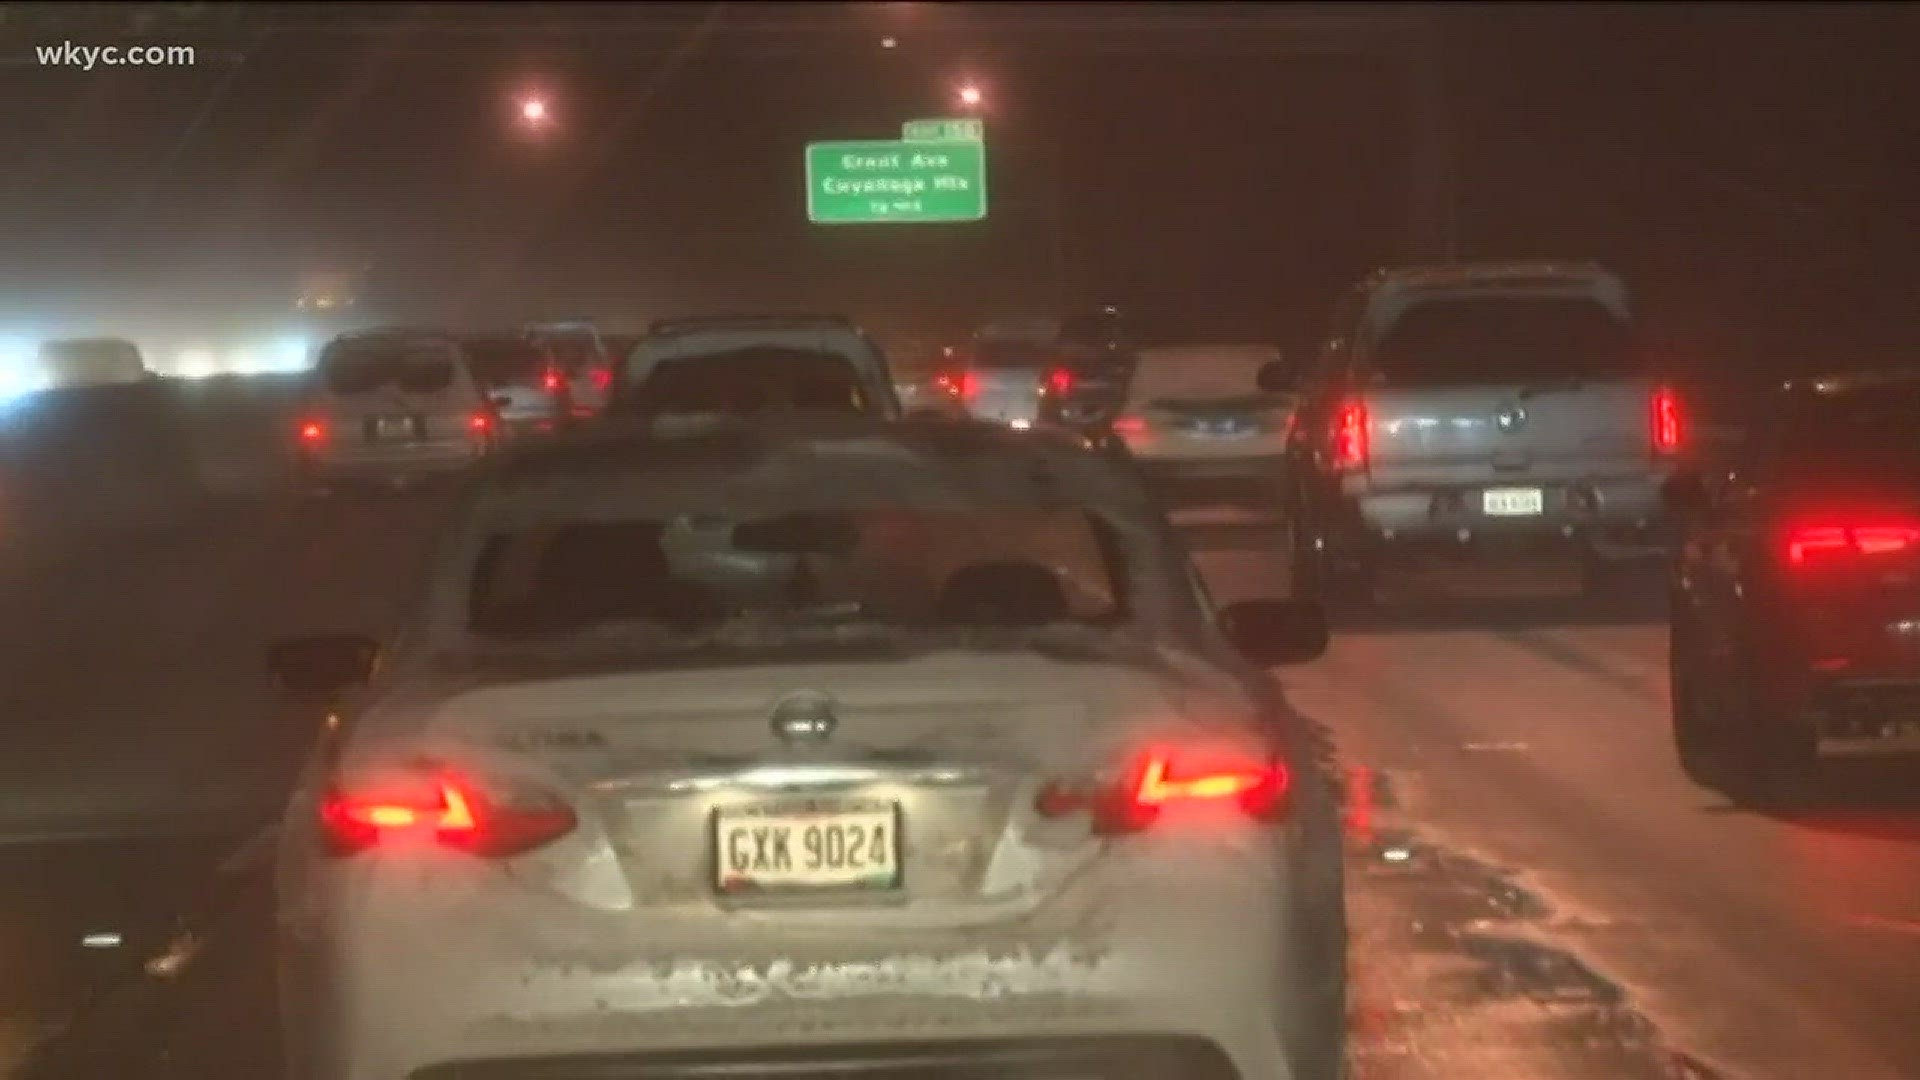 Road conditions on I-77 near Cleveland, Akron